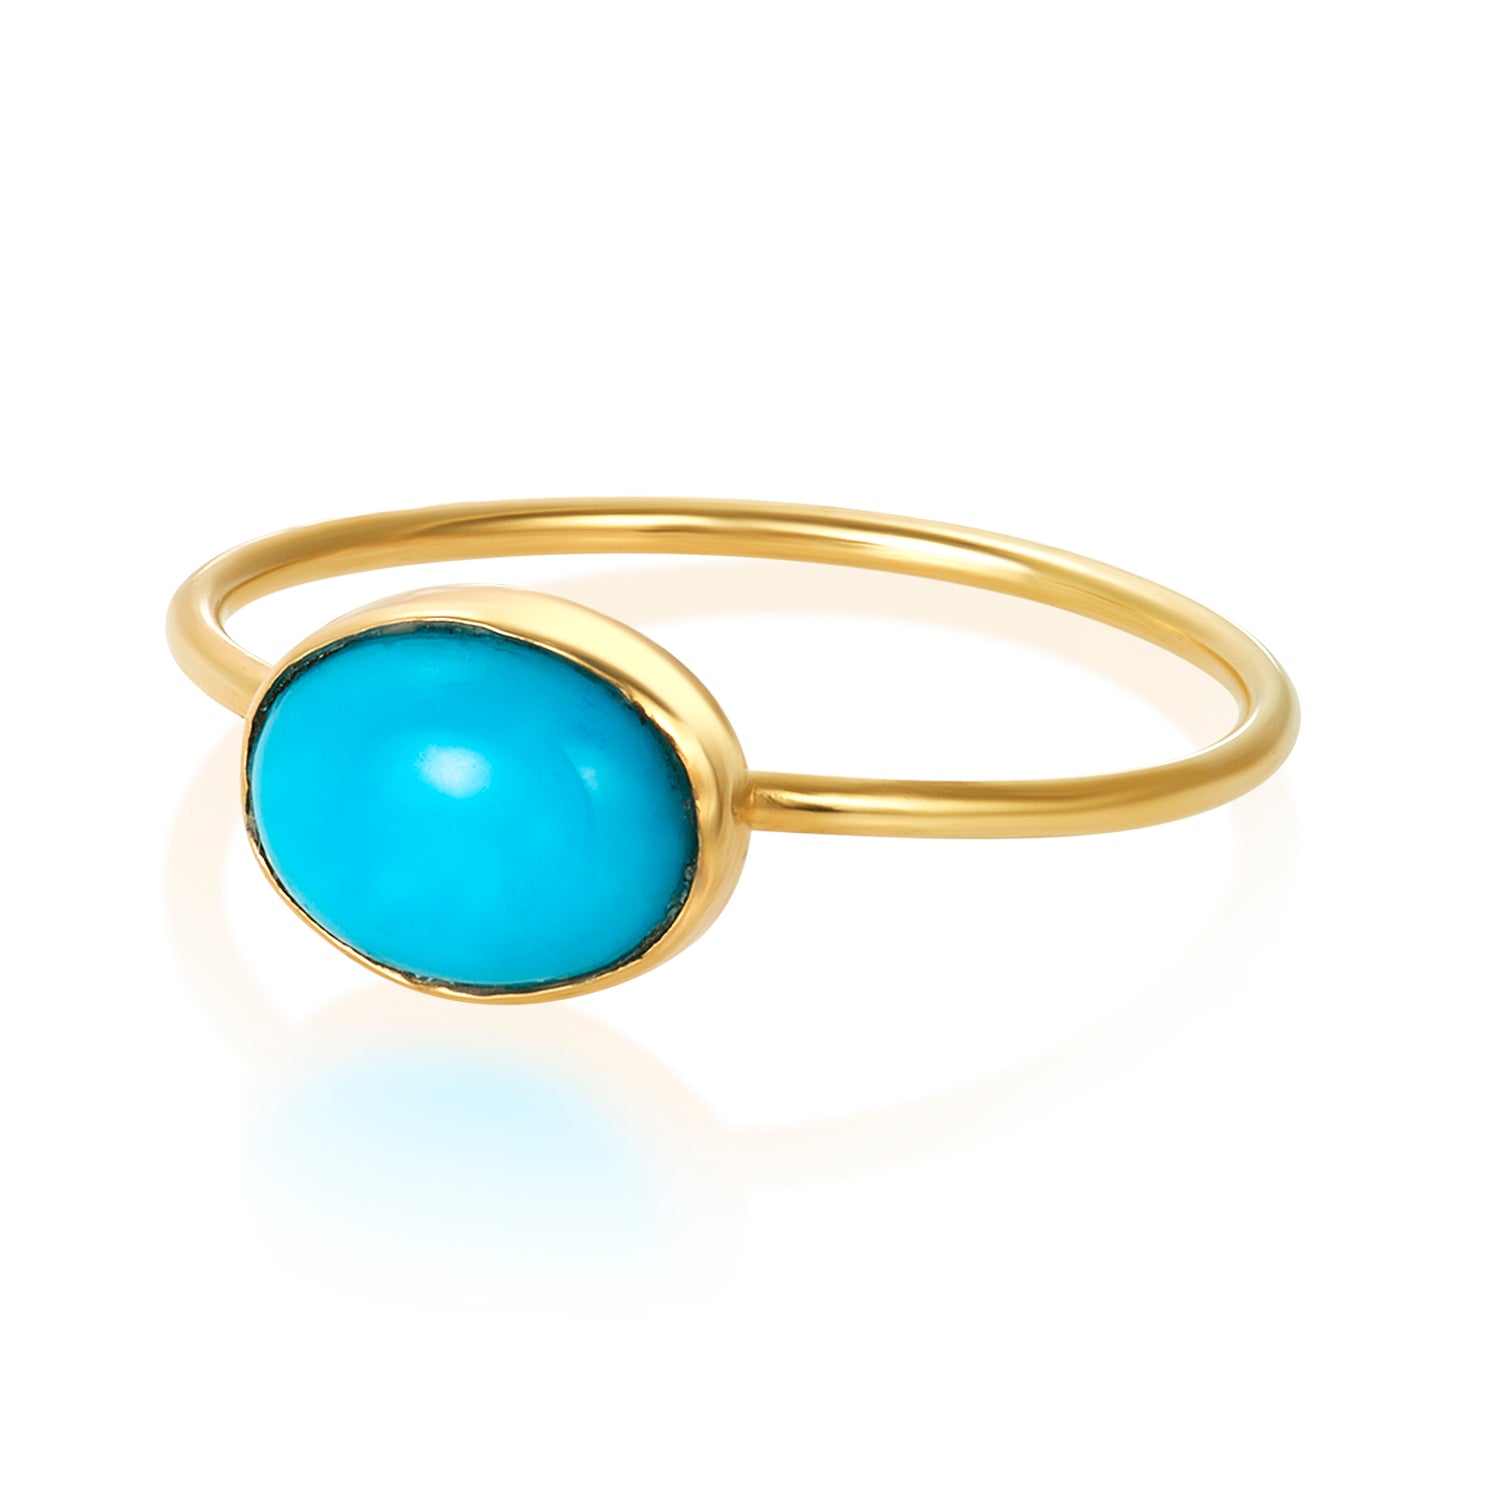 Simply Sleeping beauty Turquoise Ring 14k